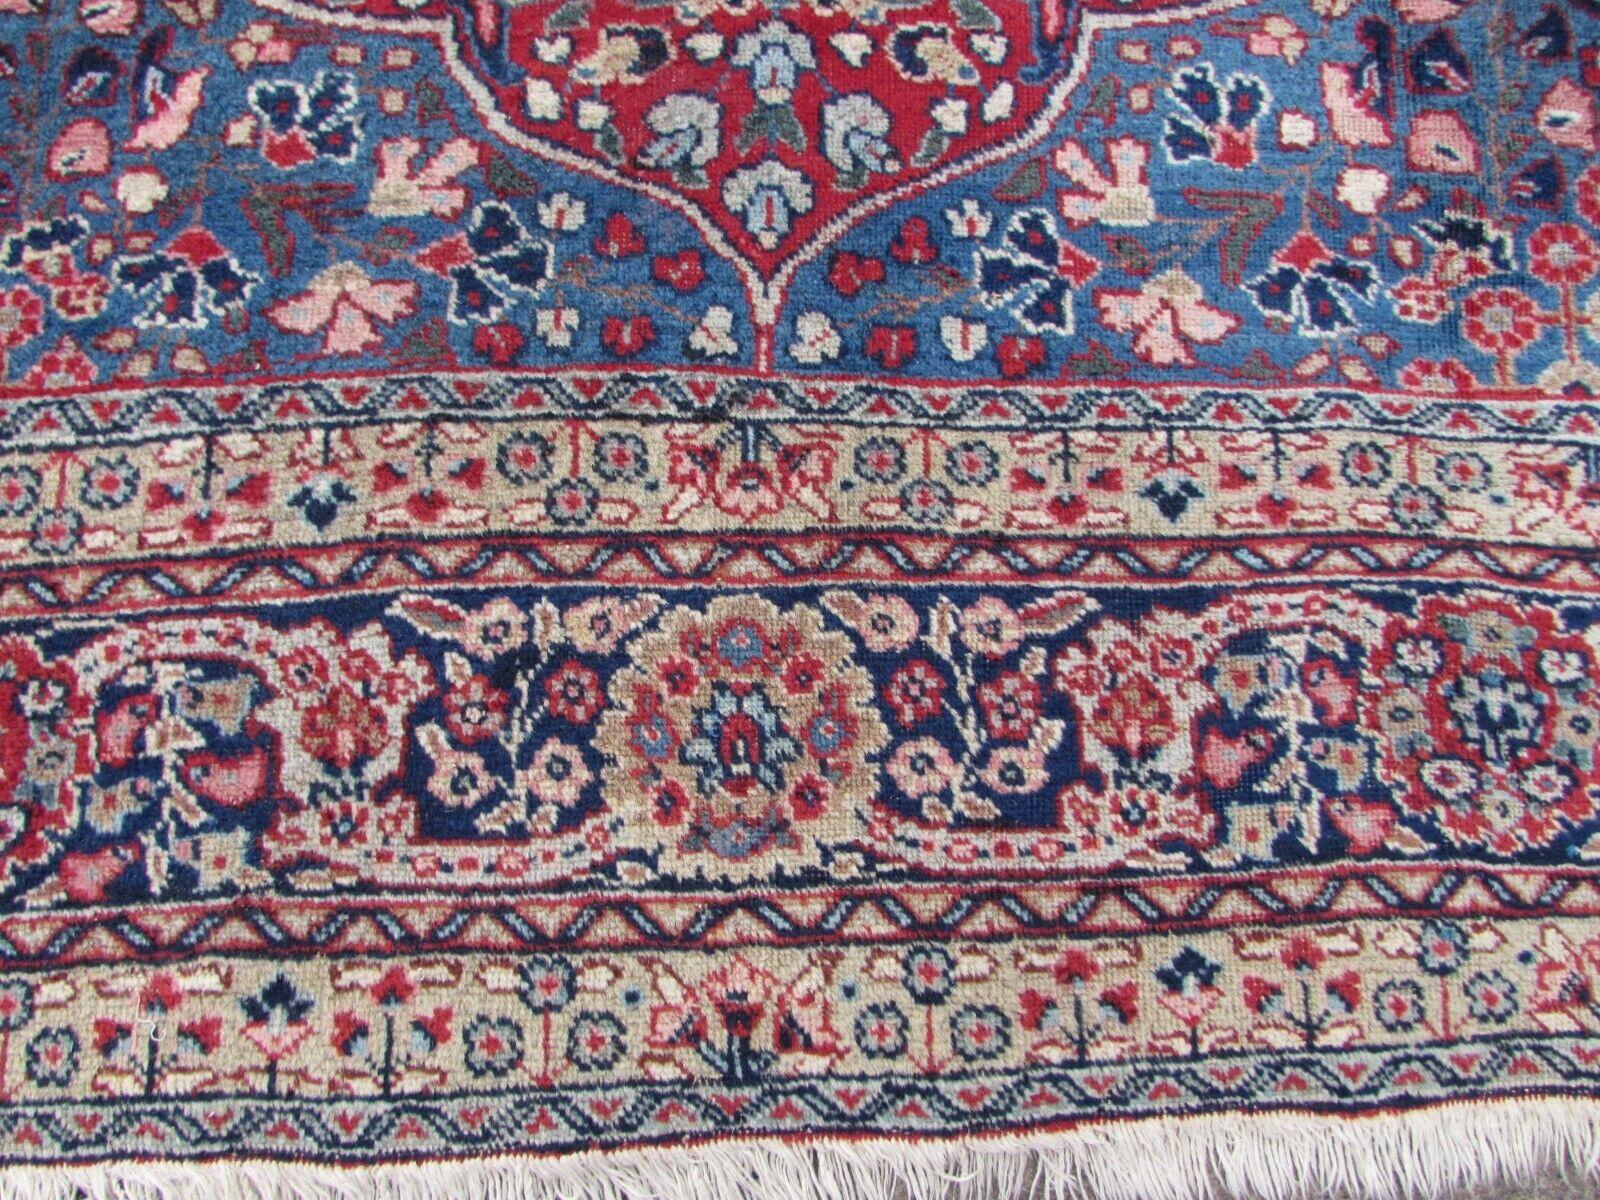 Elevate the beauty of your living space with this Handmade Vintage Persian Style Kazvin Rug. Crafted in the 1970s, this exquisite rug measures 9.3' x 12.3', making it a perfect addition to any room.

Condition: This vintage Kazvin rug is in good